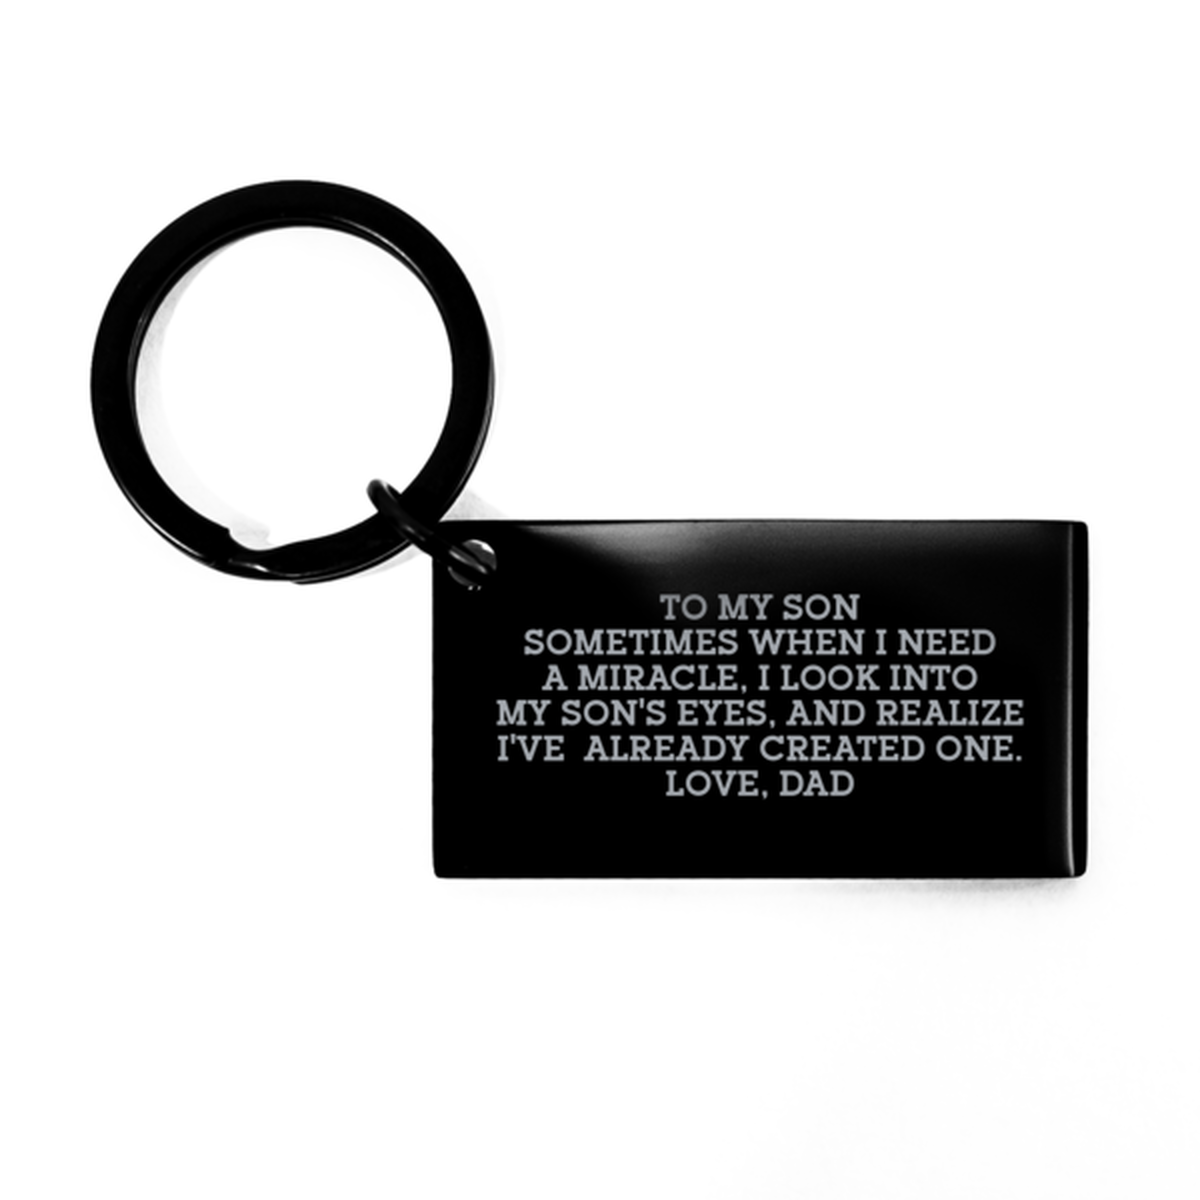 To My Son Black Keychain, Sometimes When I Need A Miracle, Graduation Day Gifts For Son From Dad, Birthday Gifts For Men